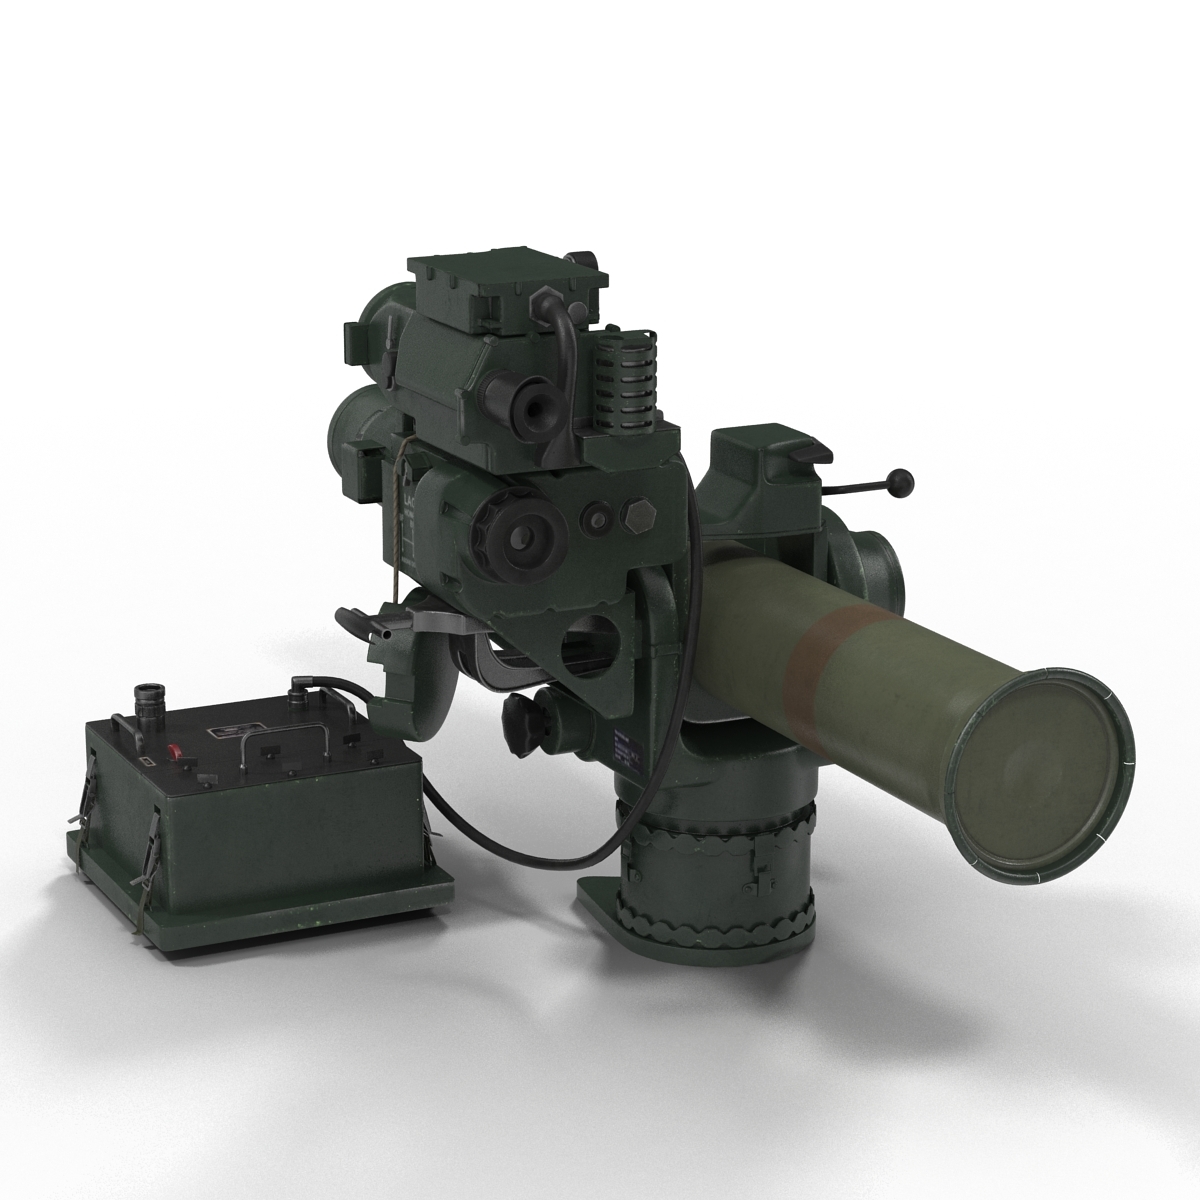 BGM-71 TOW Missile